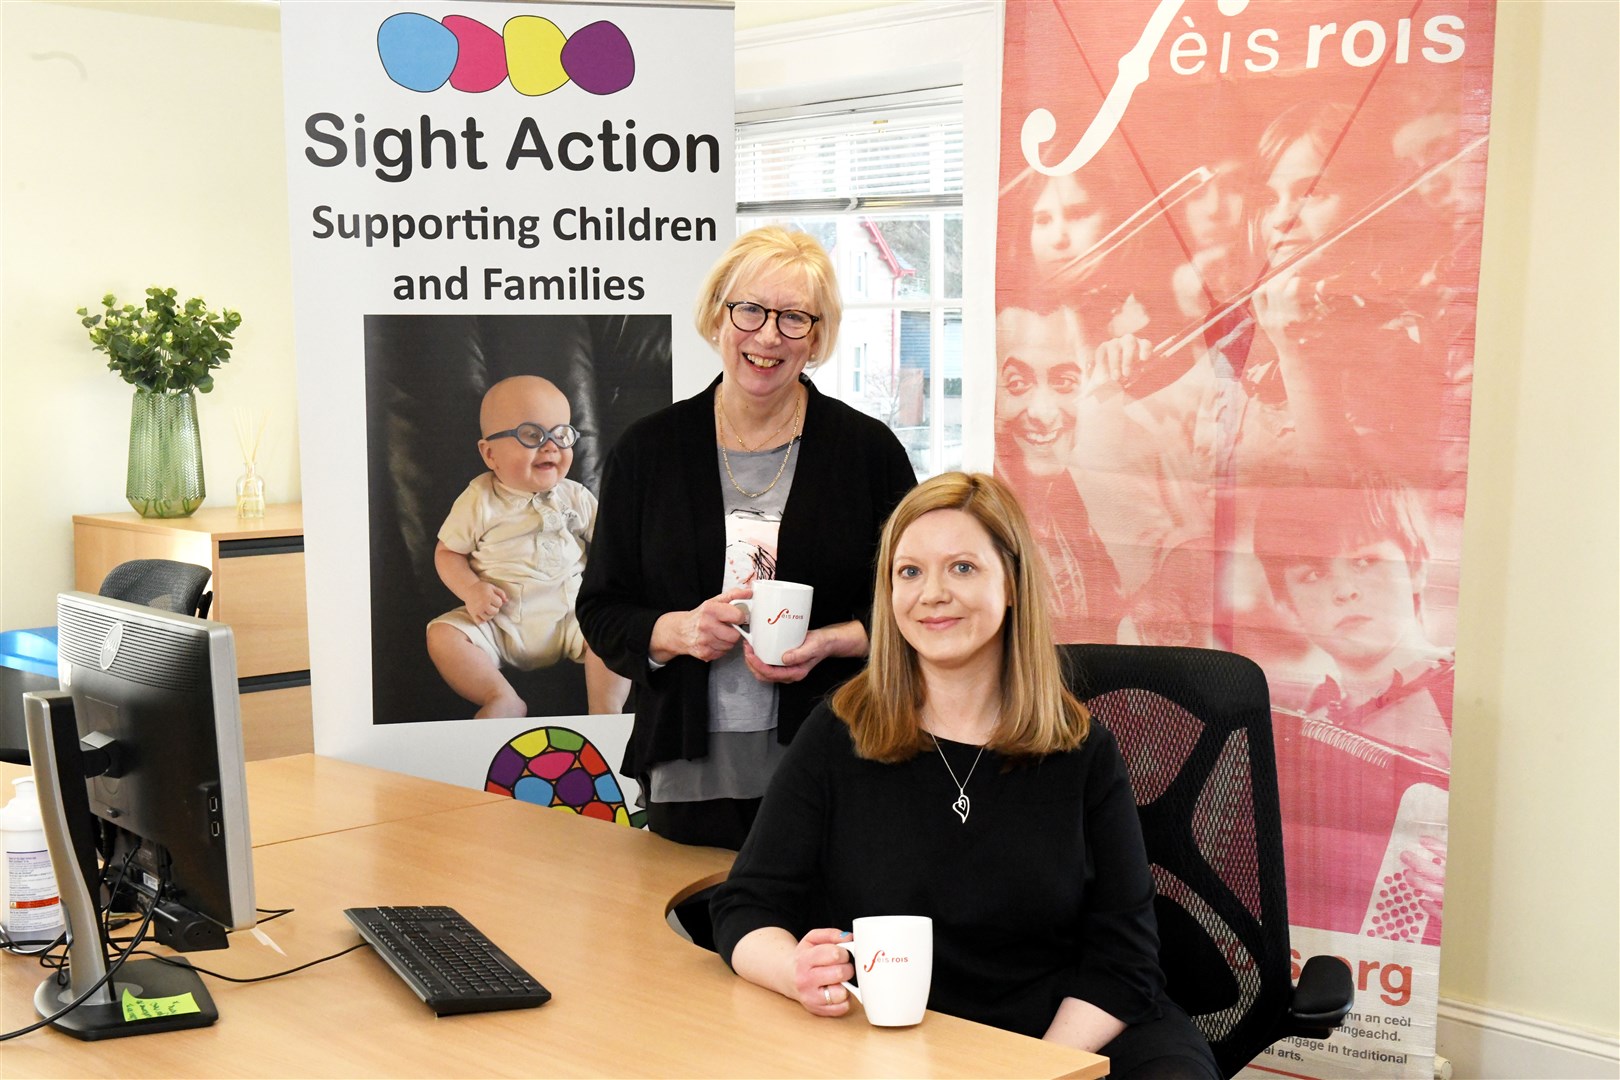 Sharing office space looks set to prompt a collaboration between Gillian Mitchell, Sight Action executive manager and Fiona Dalgetty, Feis Rois chief executive. Picture: James Mackenzie.